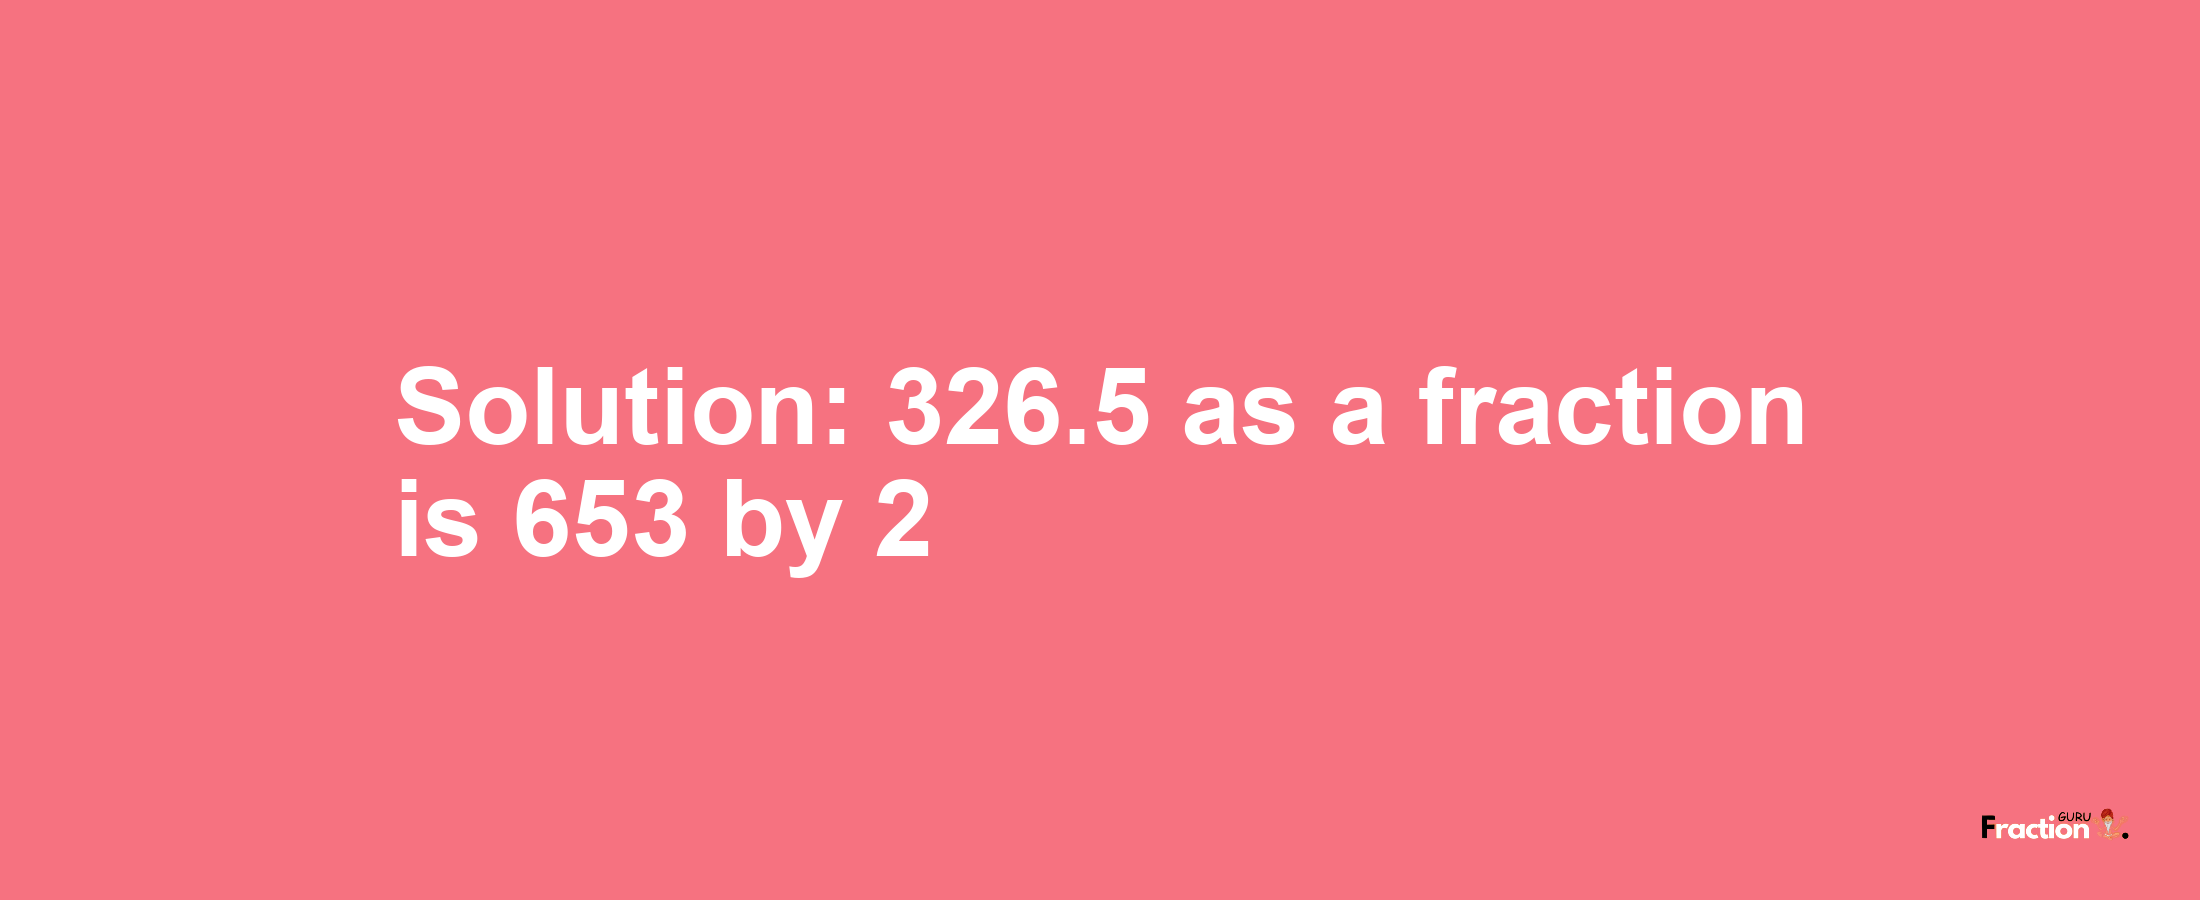 Solution:326.5 as a fraction is 653/2